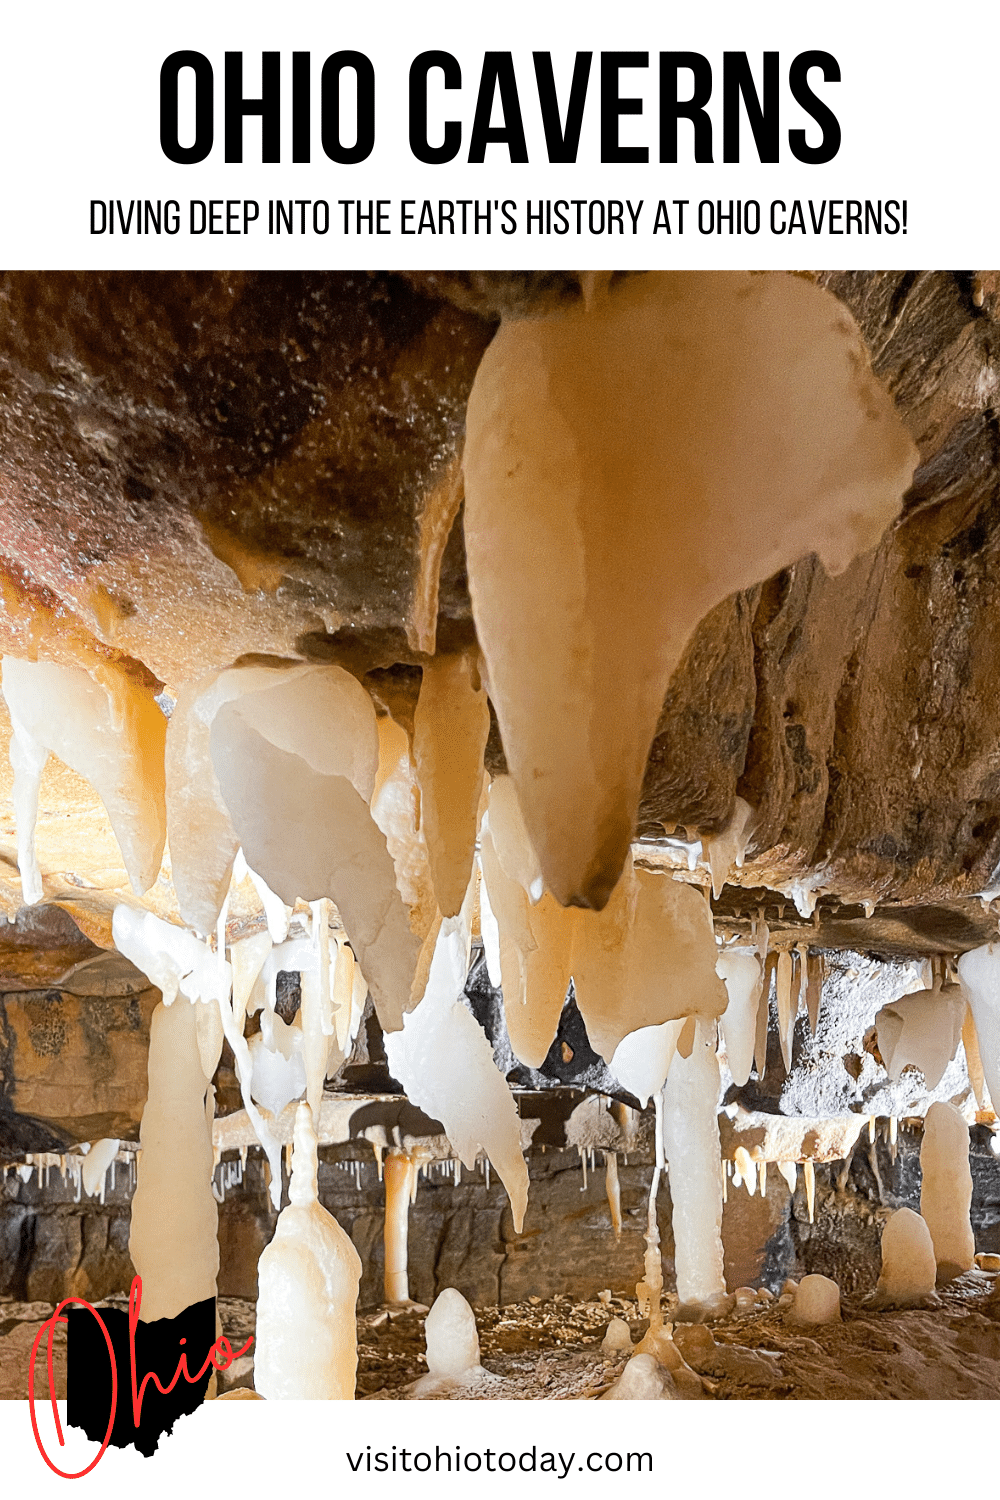 If you're looking for a unique and awe-inspiring experience, Ohio Caverns is a must-visit destination. Located in West Liberty, Ohio, these caverns are known for their stunning crystal formations, underground rivers, and unique geological features